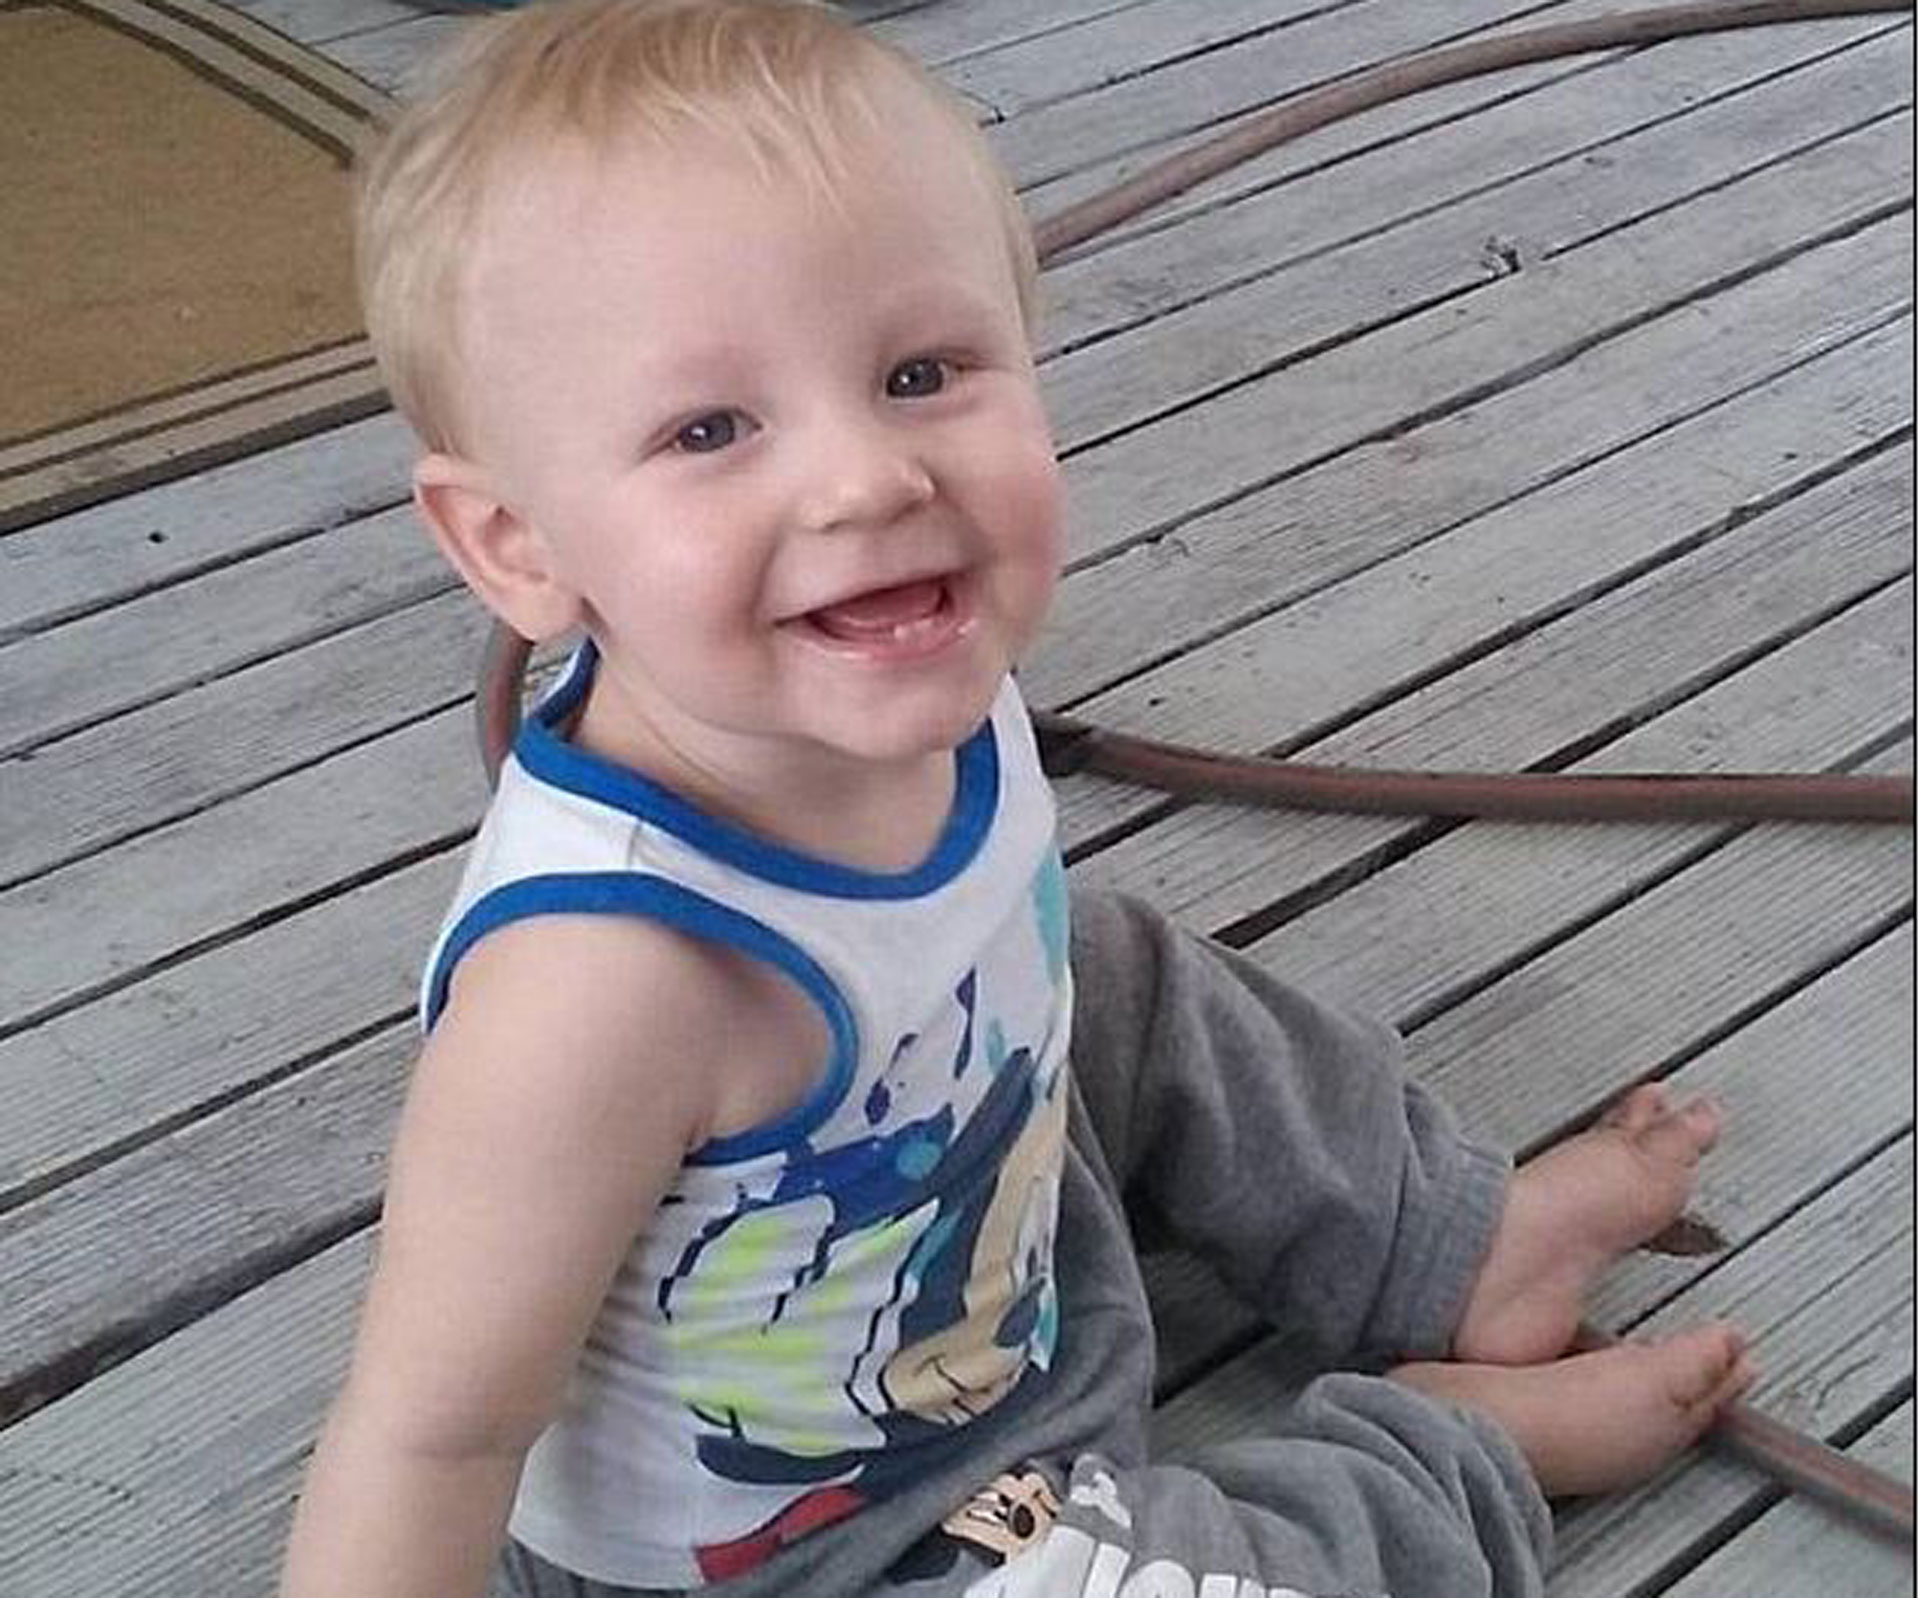 Tragic: SA toddler dies from meningococcal prompting vaccine warning